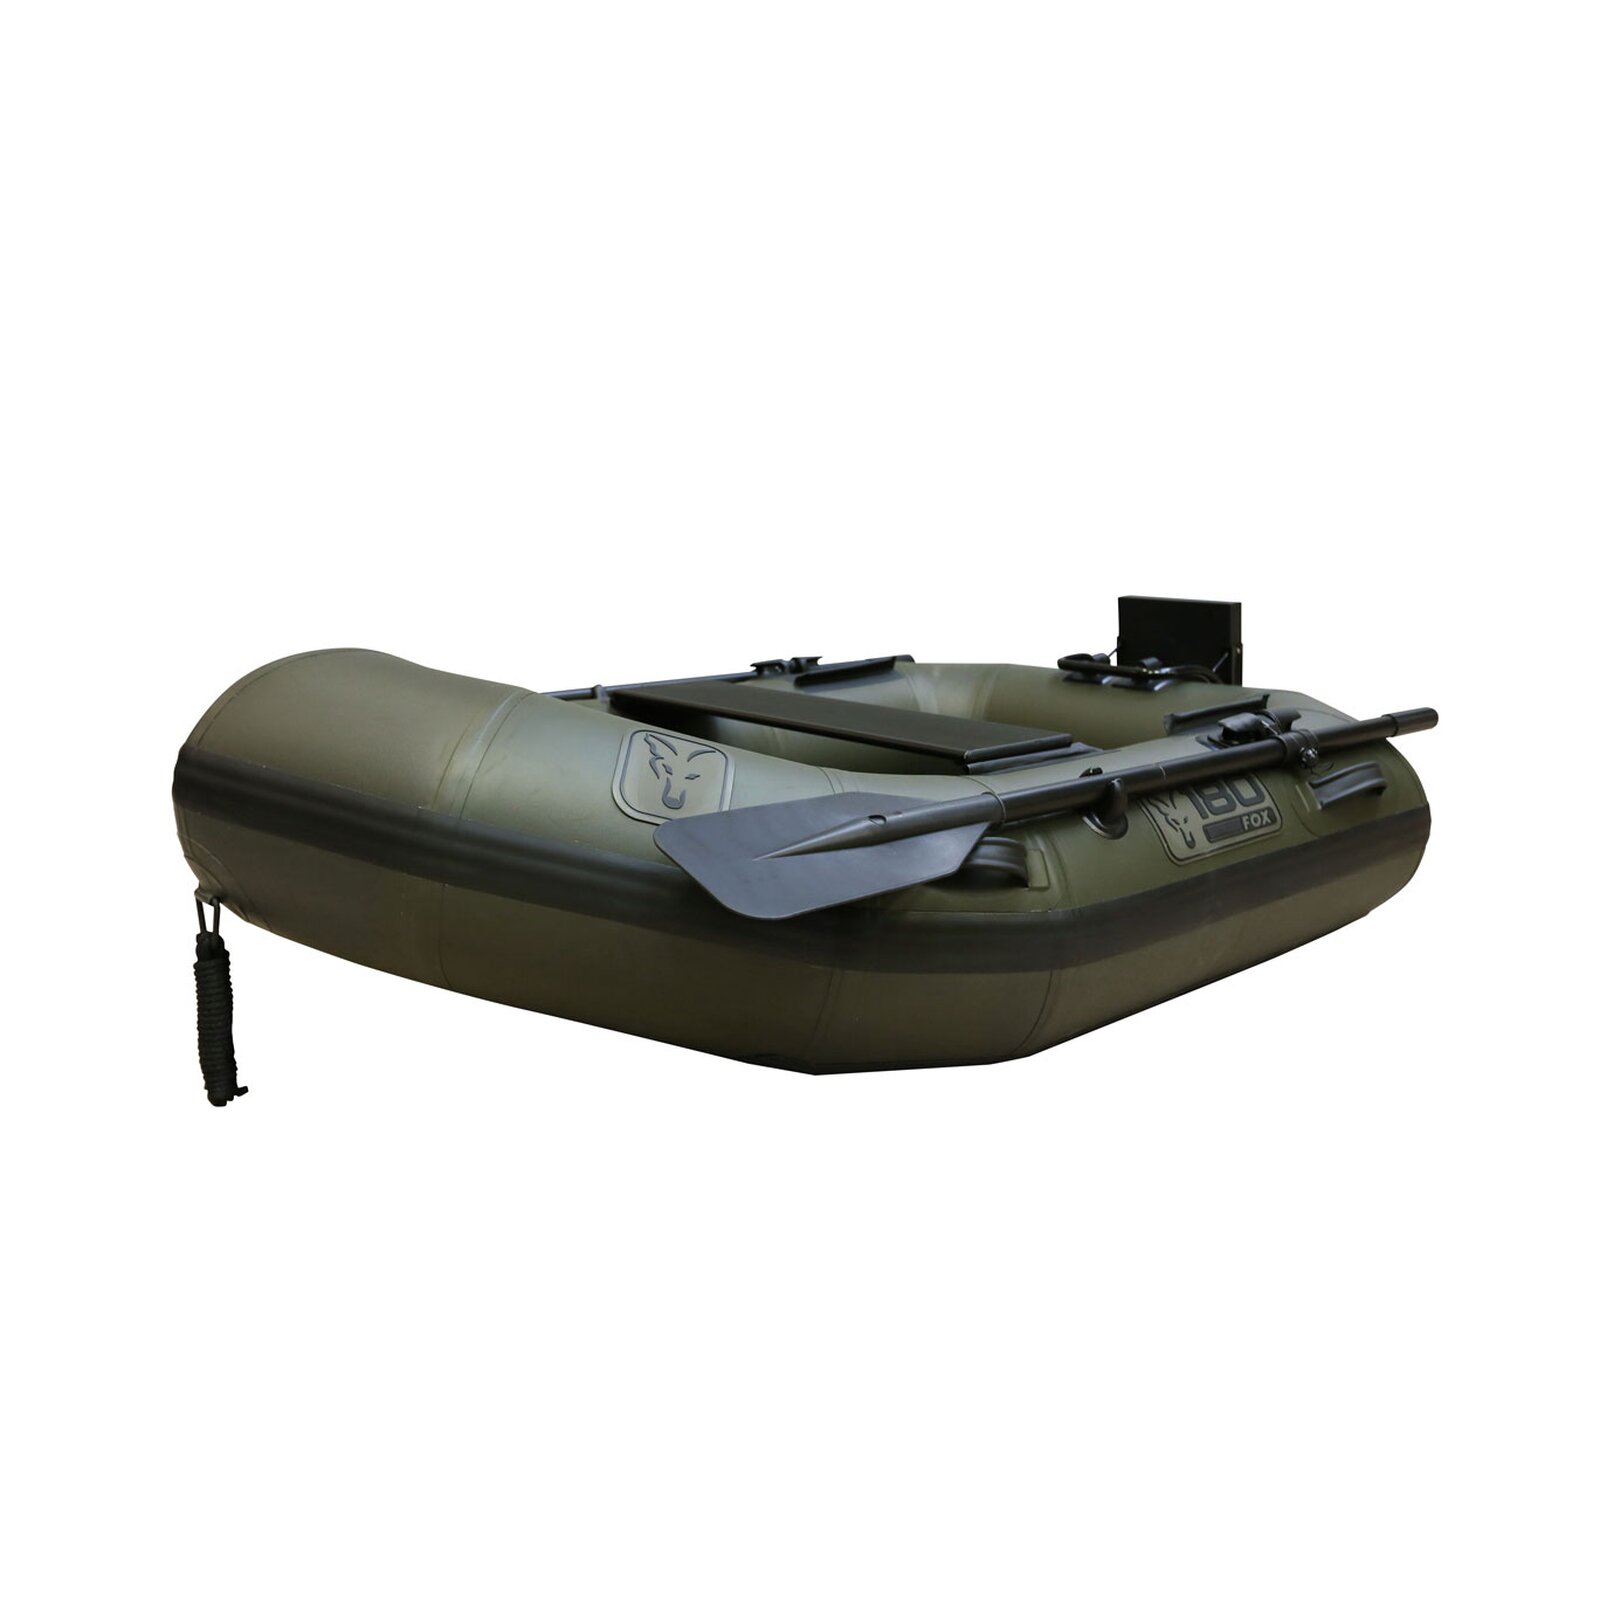 FOX 180 Inflatable Boat